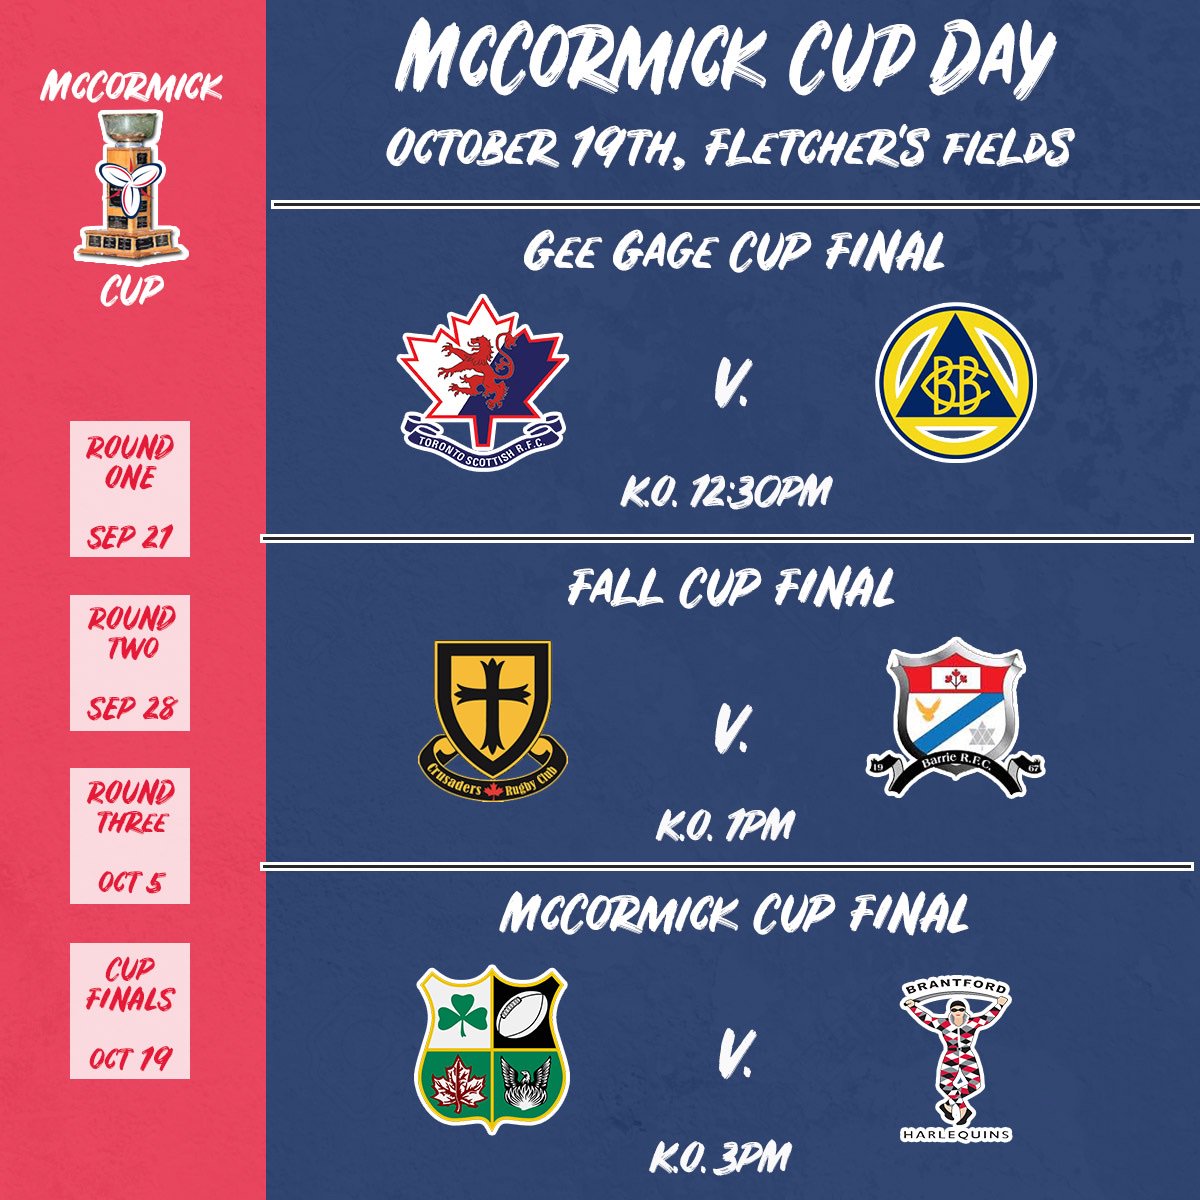 The McCormick Cup Day Schedule is set! Join us on October 19th at @FletchersFields for a fantastic day of rugby! We have THREE Cup Final matches, including the McCormick Cup Final between the @MarkhamIrishRC and the @BrantfordRugby!